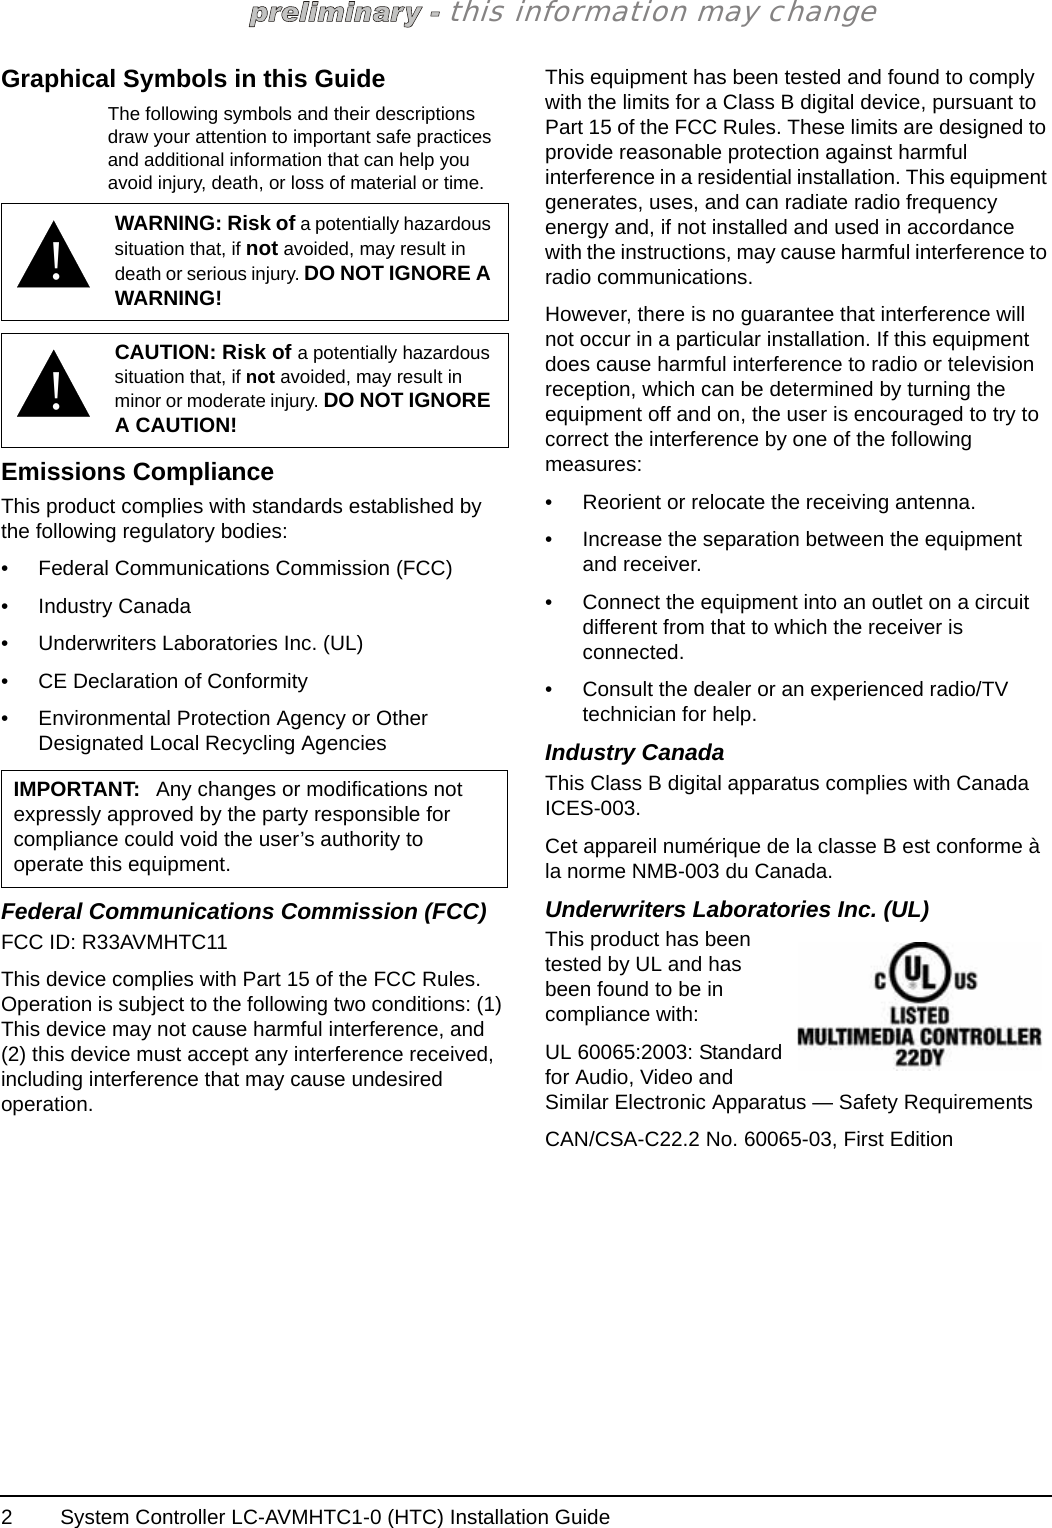 System Controller LC-AVMHTC1-0 (HTC) Installation Guide2this information may changeGraphical Symbols in this GuideThe following symbols and their descriptions draw your attention to important safe practices and additional information that can help you avoid injury, death, or loss of material or time. Emissions ComplianceThis product complies with standards established by the following regulatory bodies:• Federal Communications Commission (FCC)• Industry Canada• Underwriters Laboratories Inc. (UL)• CE Declaration of Conformity• Environmental Protection Agency or Other Designated Local Recycling AgenciesFederal Communications Commission (FCC)FCC ID: R33AVMHTC11This device complies with Part 15 of the FCC Rules. Operation is subject to the following two conditions: (1) This device may not cause harmful interference, and (2) this device must accept any interference received, including interference that may cause undesired operation.This equipment has been tested and found to comply with the limits for a Class B digital device, pursuant to Part 15 of the FCC Rules. These limits are designed to provide reasonable protection against harmful interference in a residential installation. This equipment generates, uses, and can radiate radio frequency energy and, if not installed and used in accordance with the instructions, may cause harmful interference to radio communications.However, there is no guarantee that interference will not occur in a particular installation. If this equipment does cause harmful interference to radio or television reception, which can be determined by turning the equipment off and on, the user is encouraged to try to correct the interference by one of the following measures:• Reorient or relocate the receiving antenna.• Increase the separation between the equipment and receiver.• Connect the equipment into an outlet on a circuit different from that to which the receiver is connected.• Consult the dealer or an experienced radio/TV technician for help.Industry CanadaThis Class B digital apparatus complies with Canada ICES-003.Cet appareil numérique de la classe B est conforme à la norme NMB-003 du Canada.Underwriters Laboratories Inc. (UL)This product has been tested by UL and has been found to be in compliance with:UL 60065:2003: Standard for Audio, Video and Similar Electronic Apparatus — Safety RequirementsCAN/CSA-C22.2 No. 60065-03, First Edition!WARNING: Risk of a potentially hazardous situation that, if not avoided, may result in death or serious injury. DO NOT IGNORE A WARNING!!CAUTION: Risk of a potentially hazardous situation that, if not avoided, may result in minor or moderate injury. DO NOT IGNORE A CAUTION!IMPORTANT: Any changes or modifications not expressly approved by the party responsible for compliance could void the user’s authority to operate this equipment.